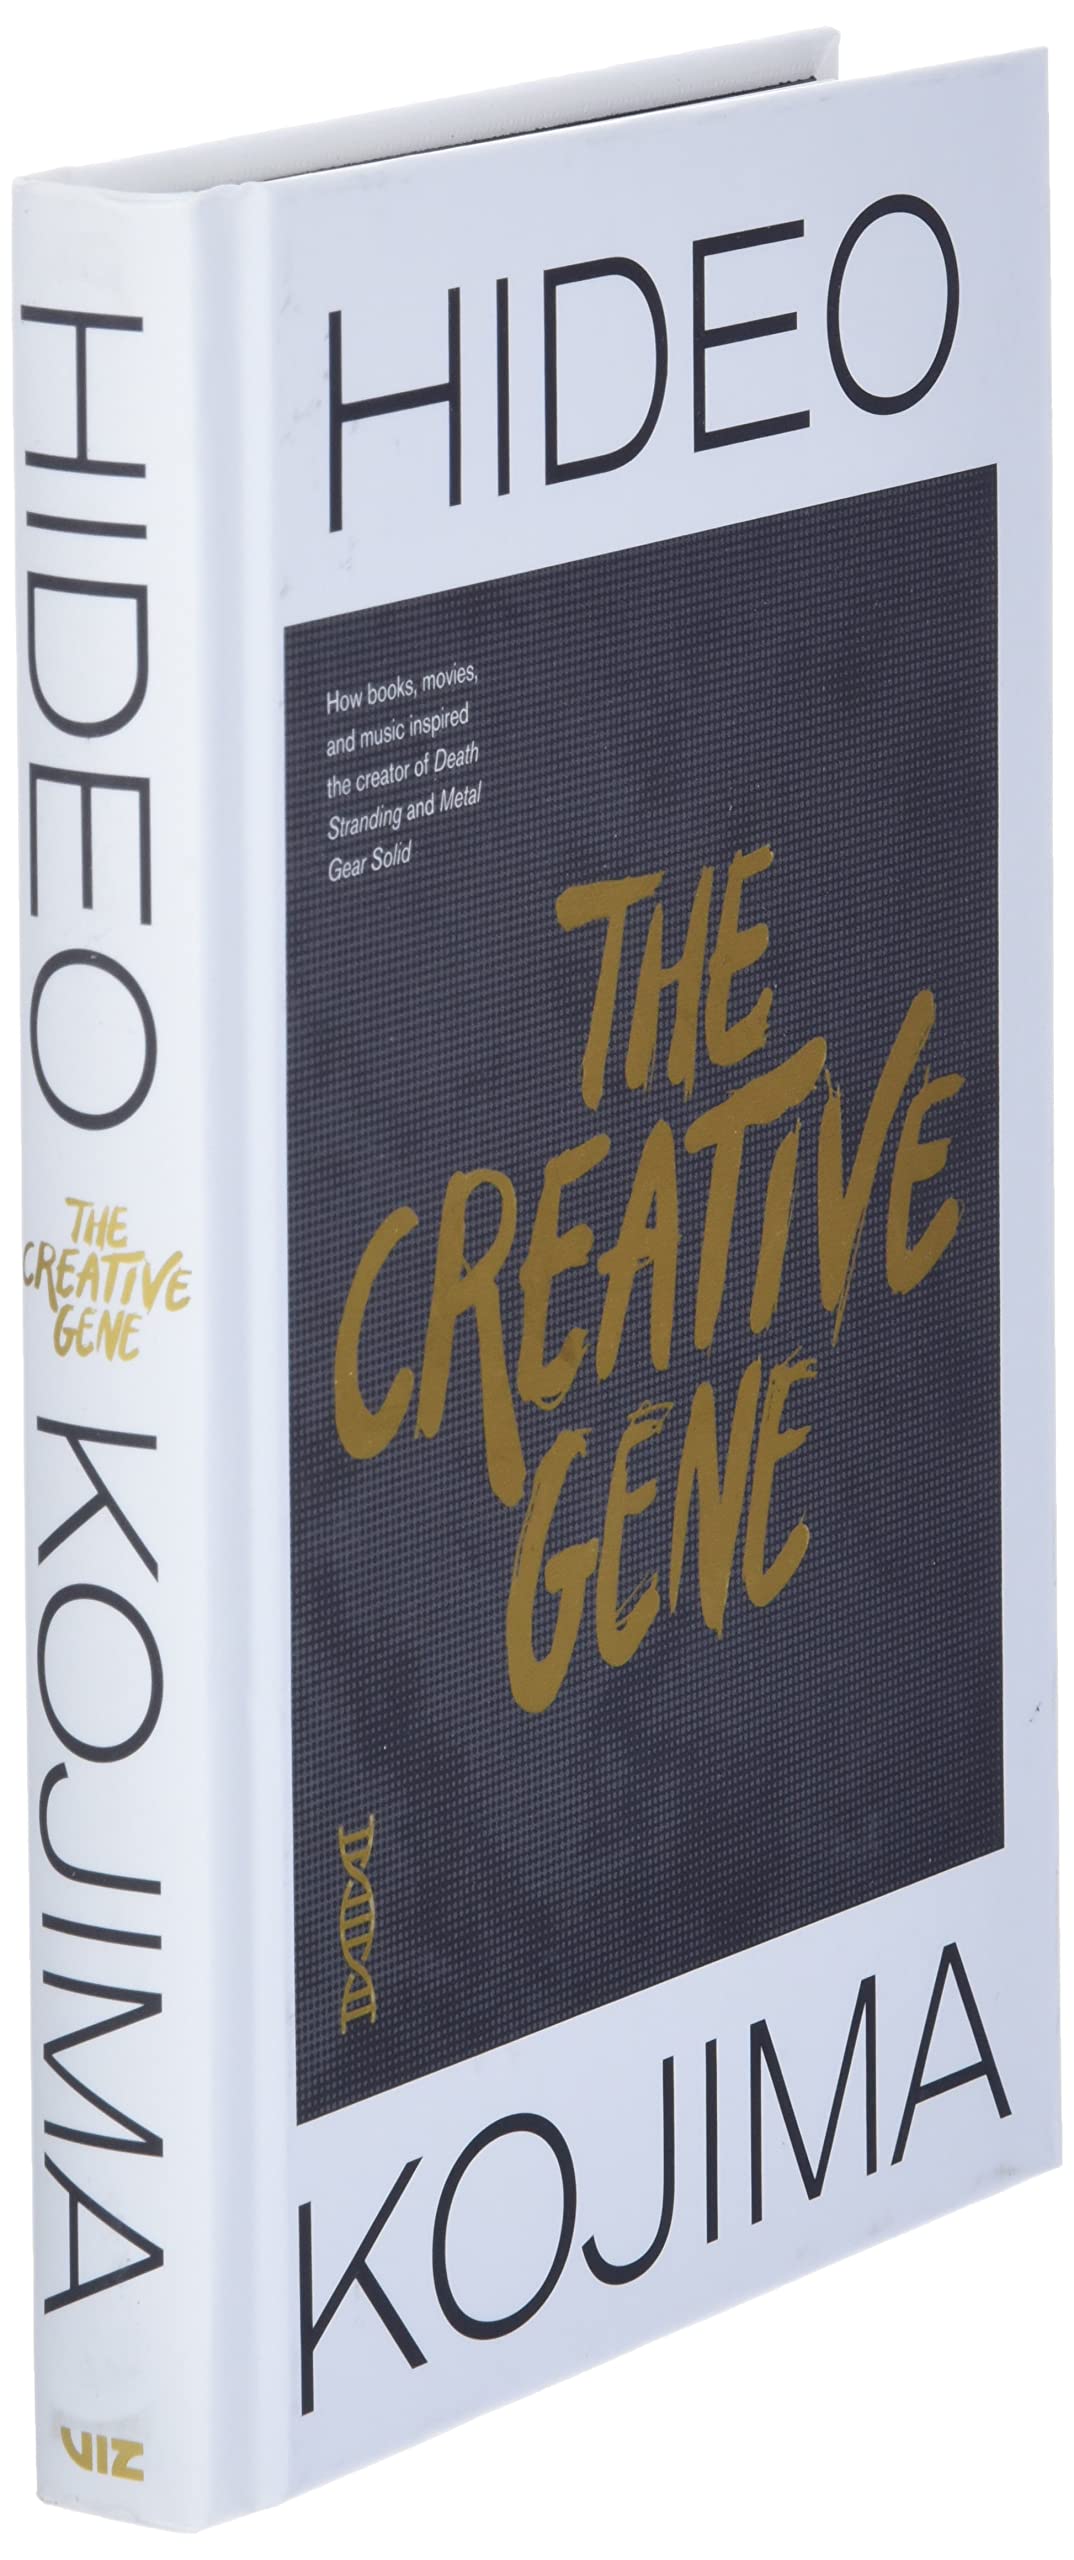 The Creative Gene: How books, movies, and music inspired the creator of Death Stranding and Metal Gear Solid